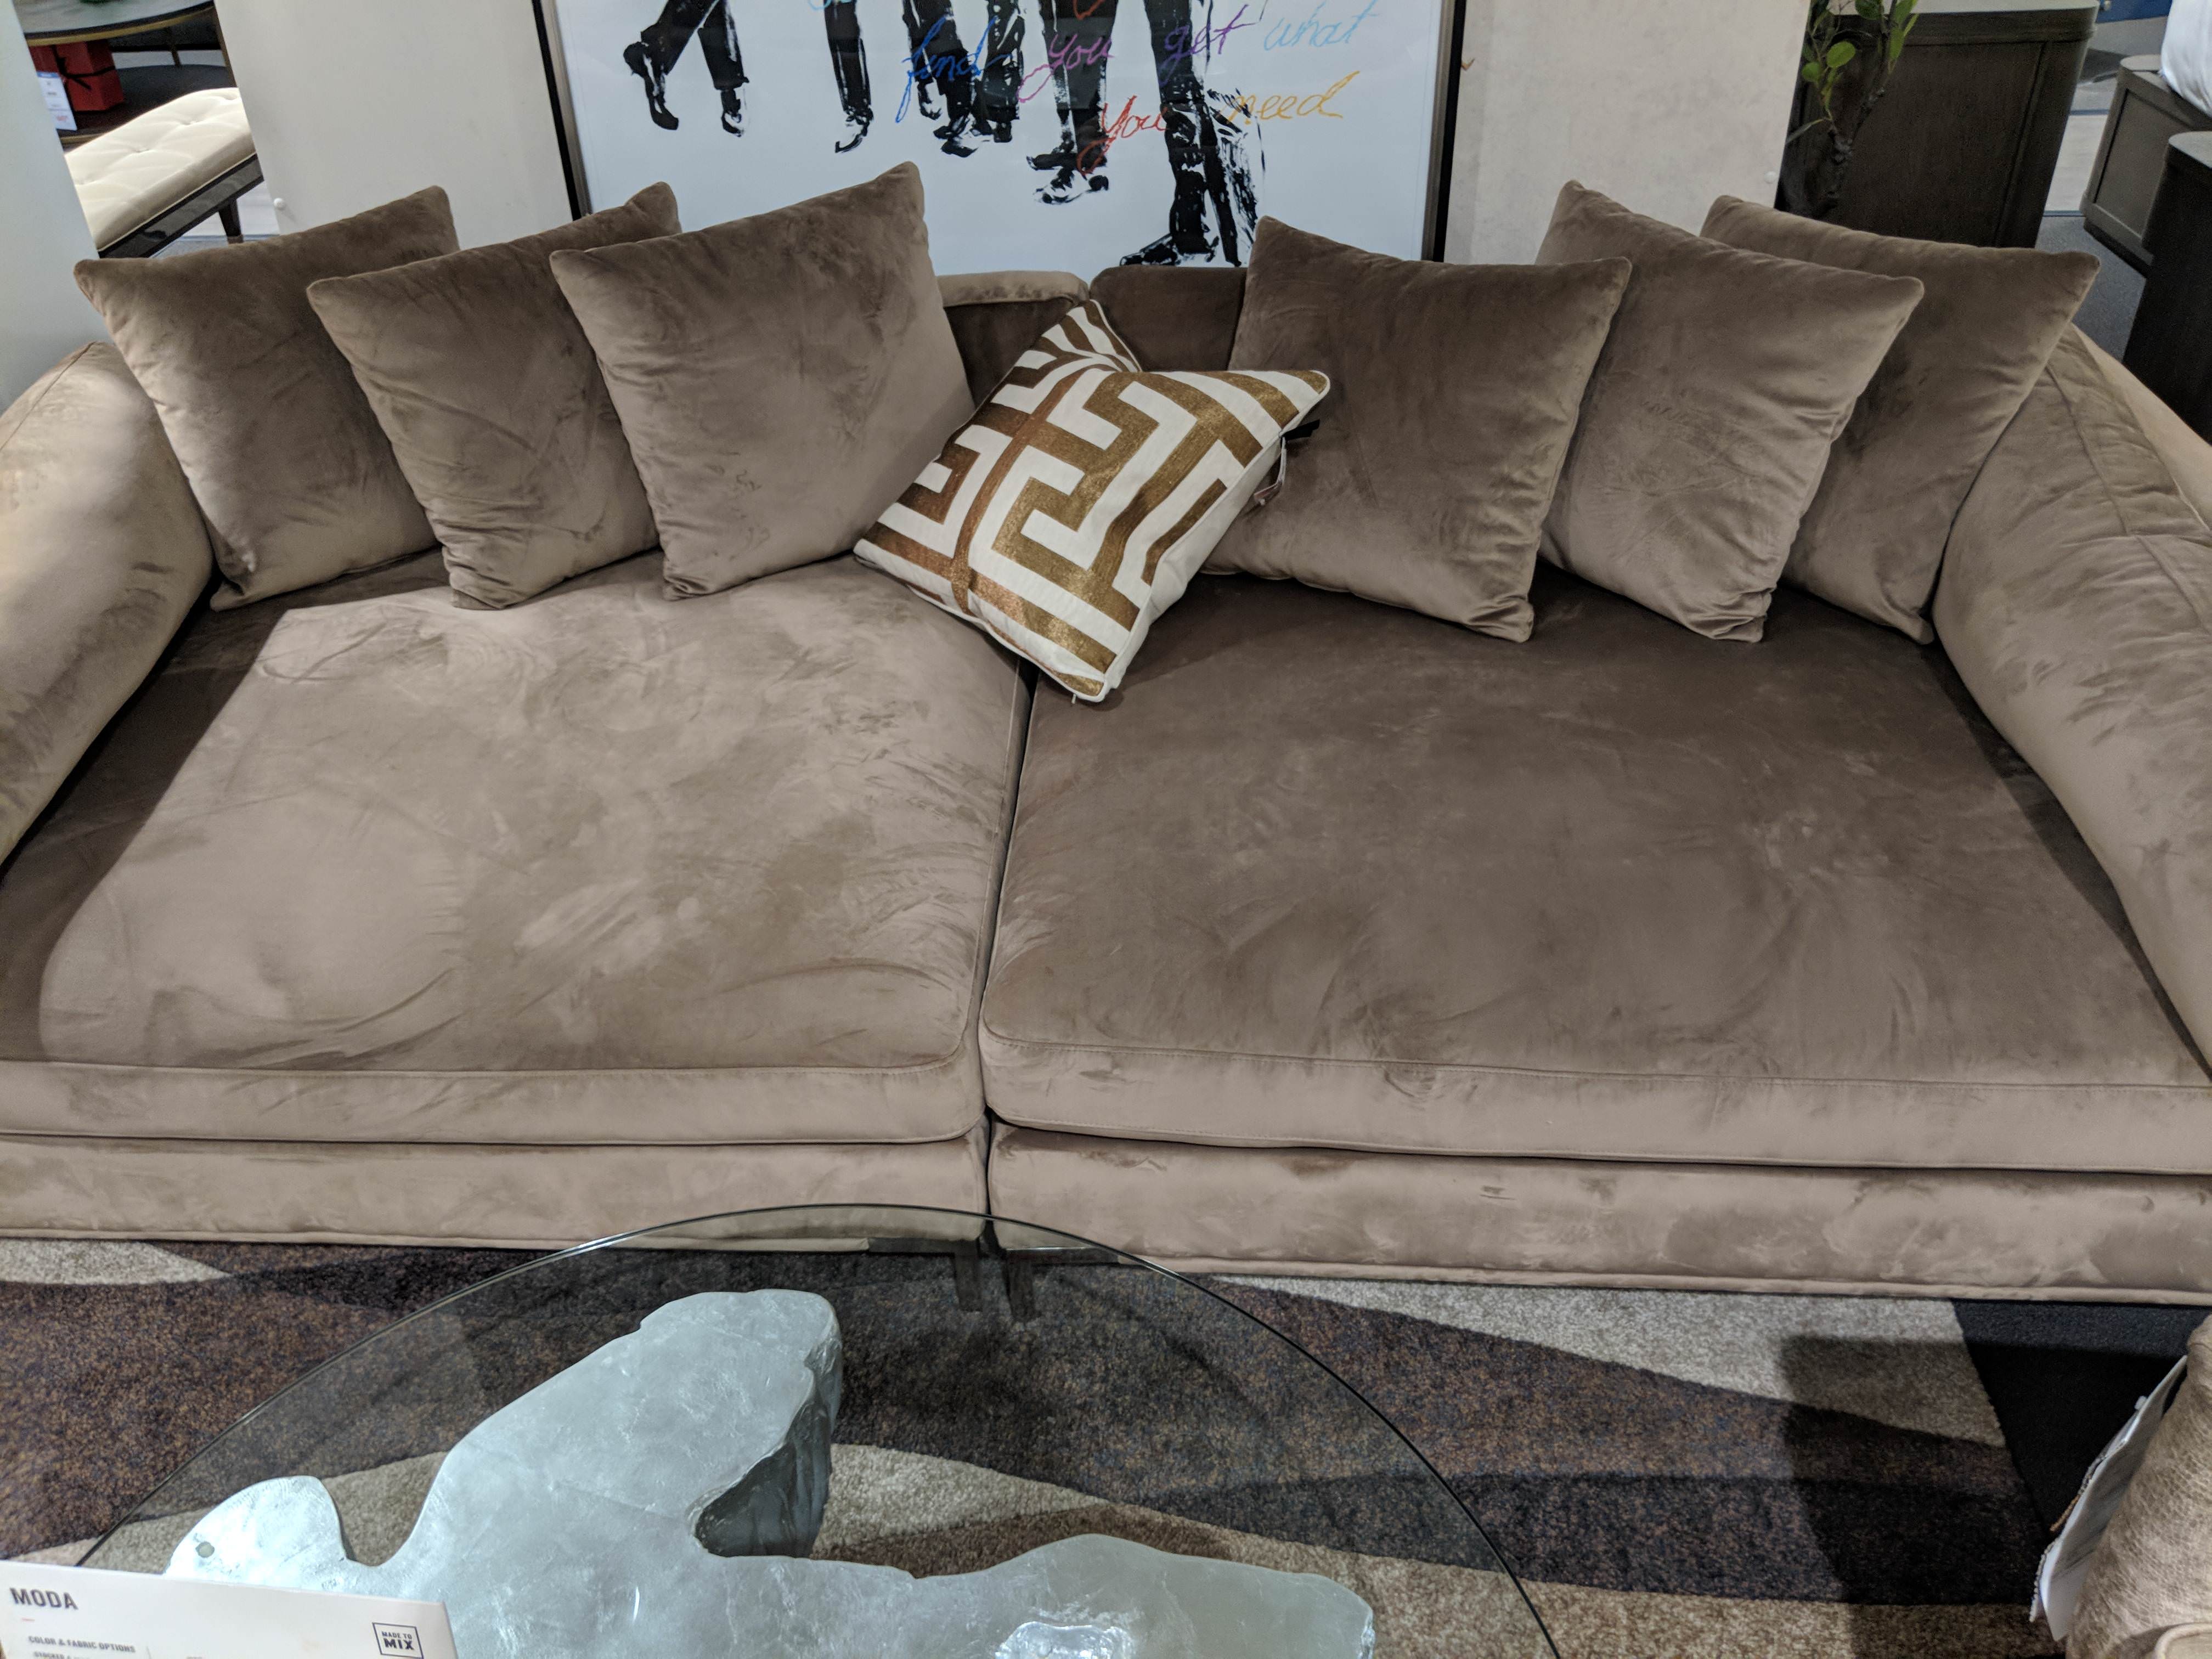 Help! Looking for Similar Very Deep Sofa. Fits a Body and is a Temp Bed